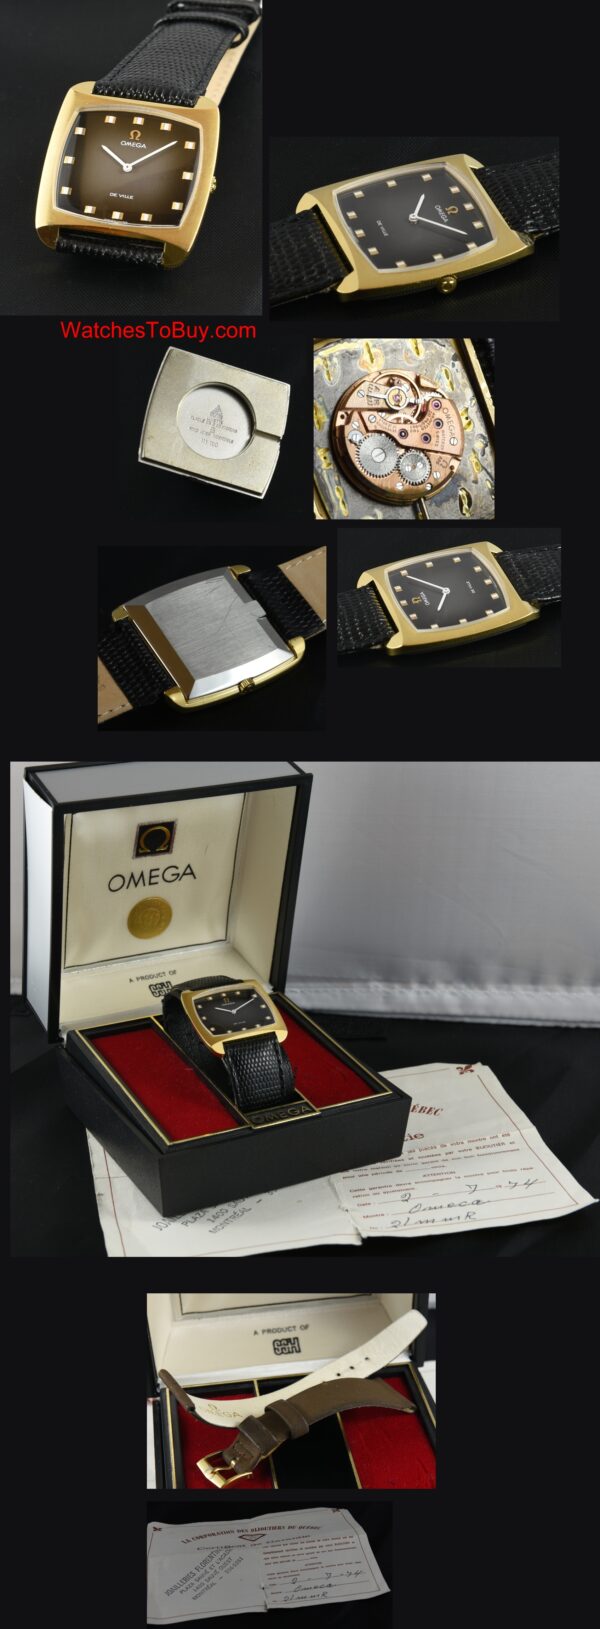 1974 television-shaped Omega De ville gold-plated watch with original box, paper, winding crown, and caliber 620 manual winding movement.